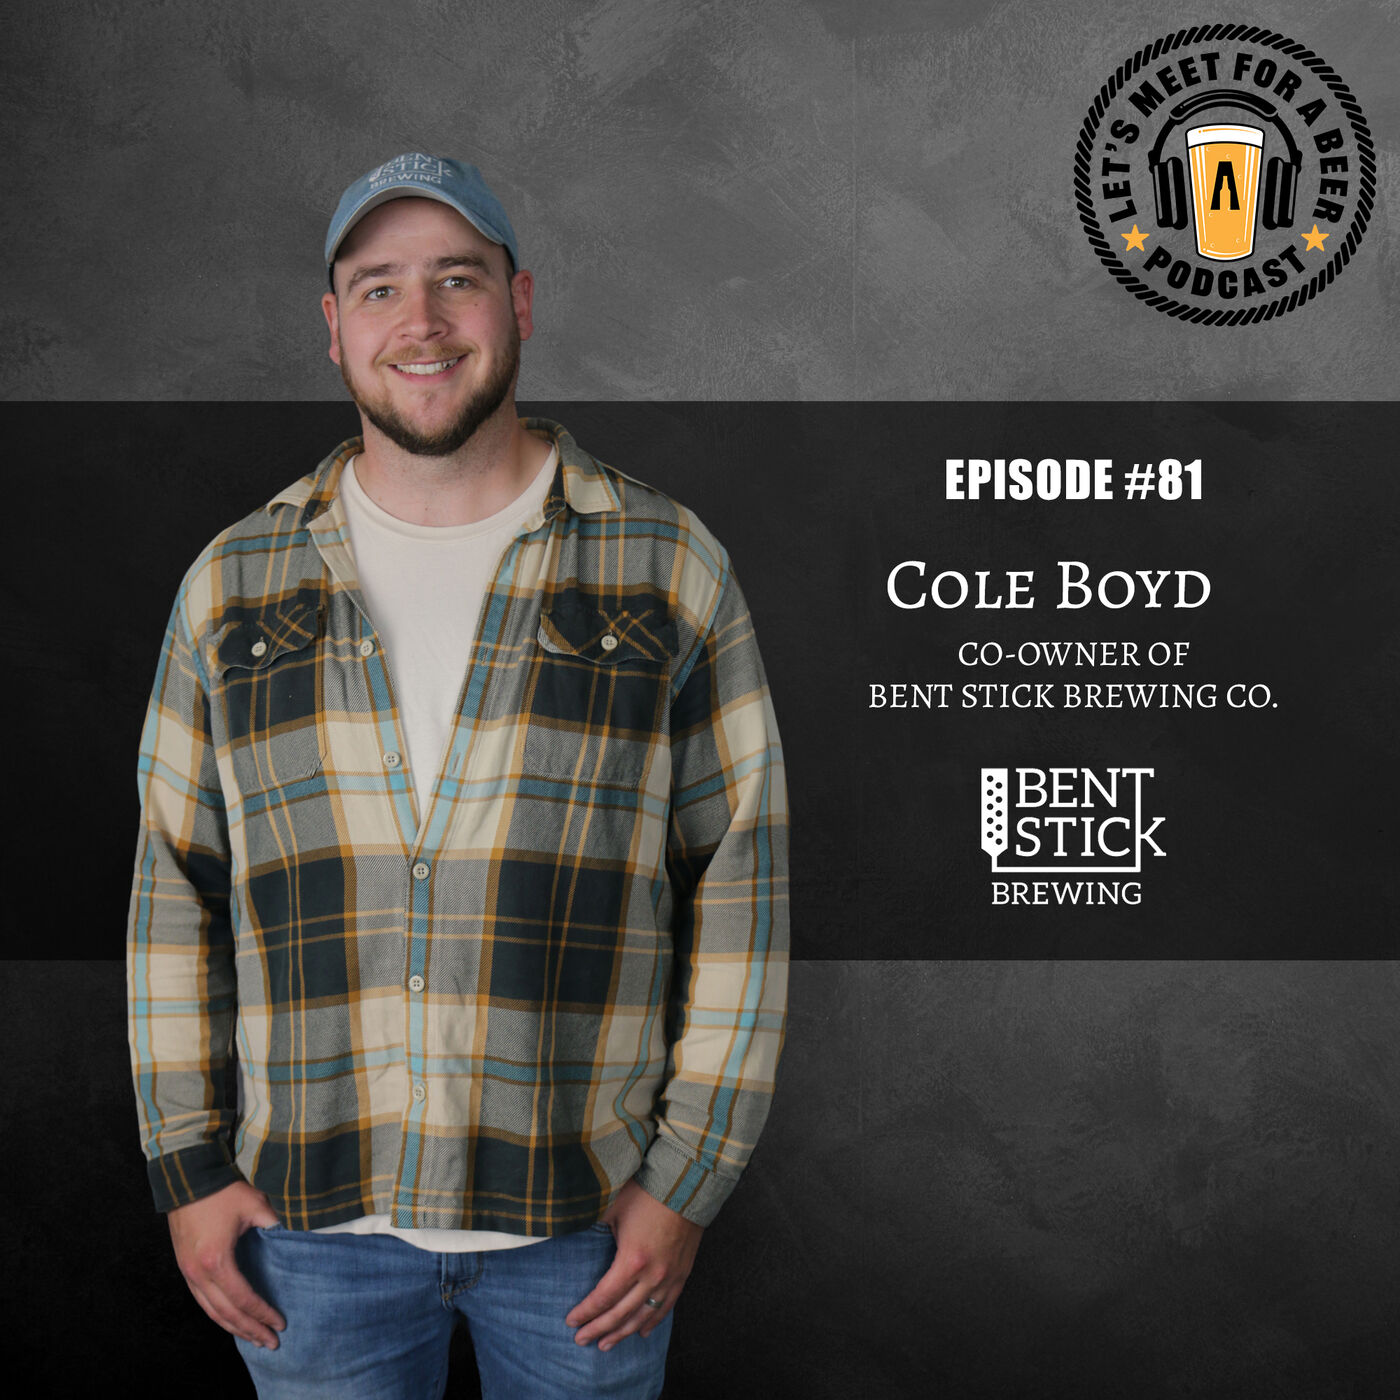 Episode #81 – Cole Boyd from Bent Stick Brewing Co.